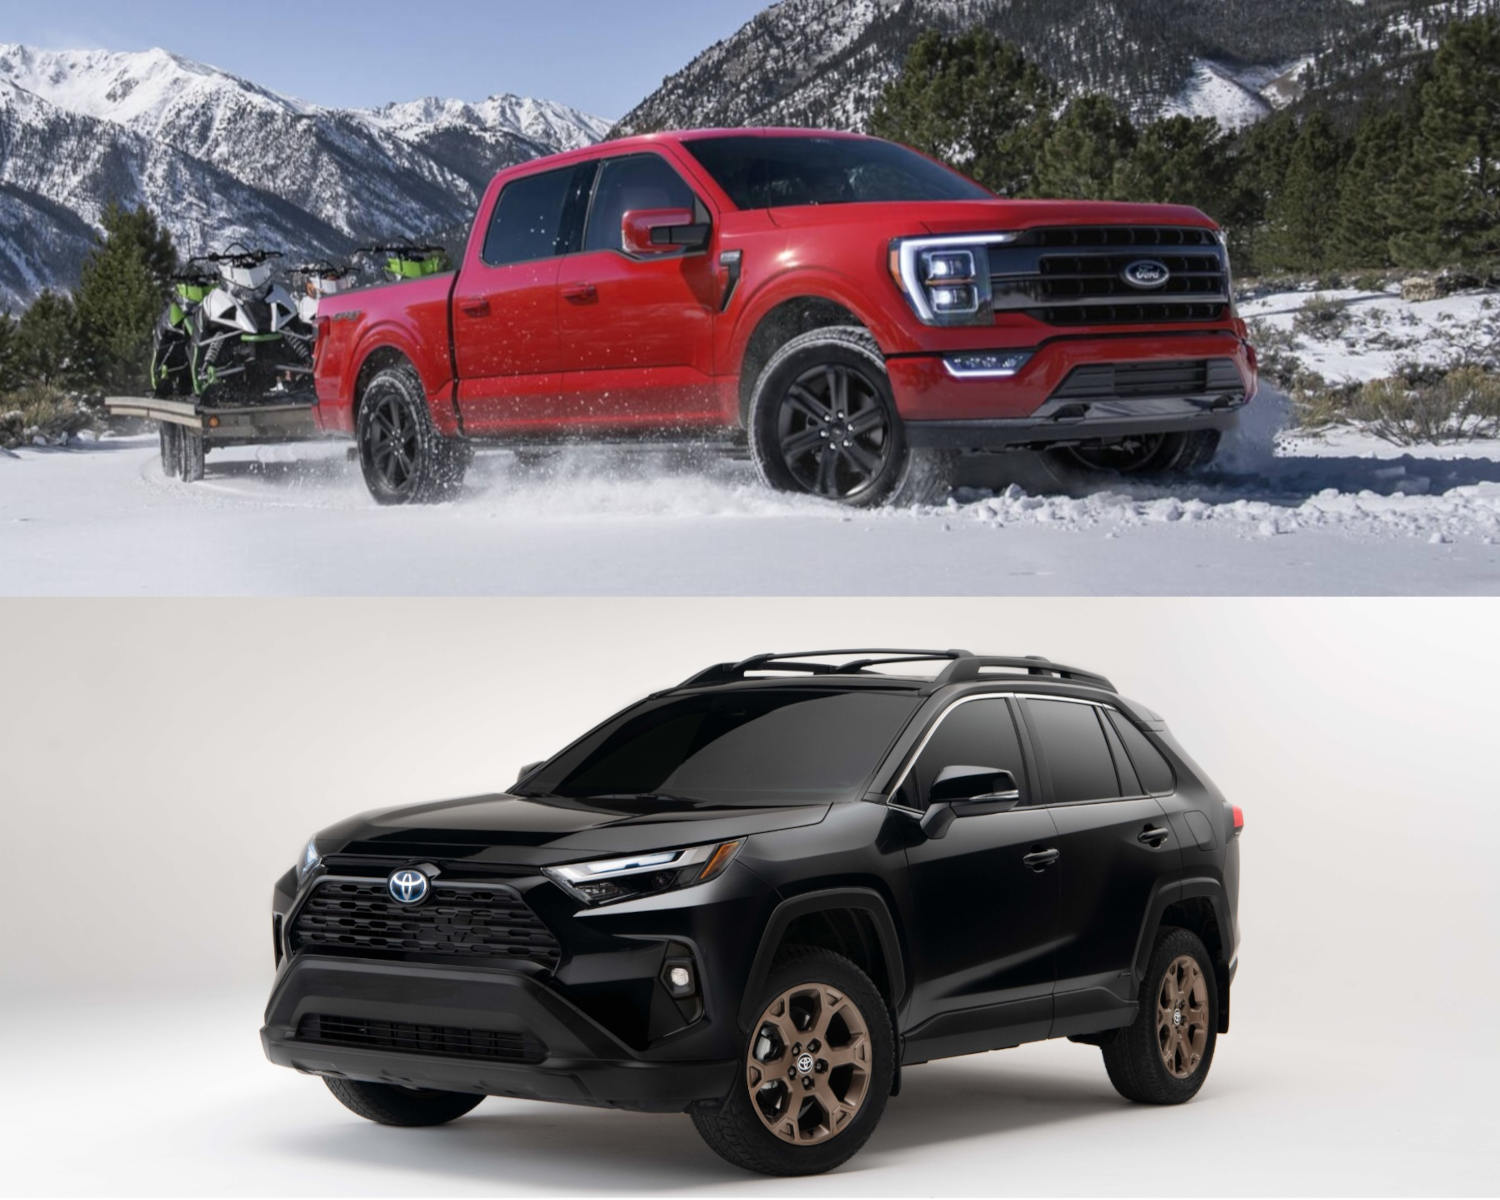 Toyota and Ford have some best selling trucks and SUVs like this F-150 and RAV4